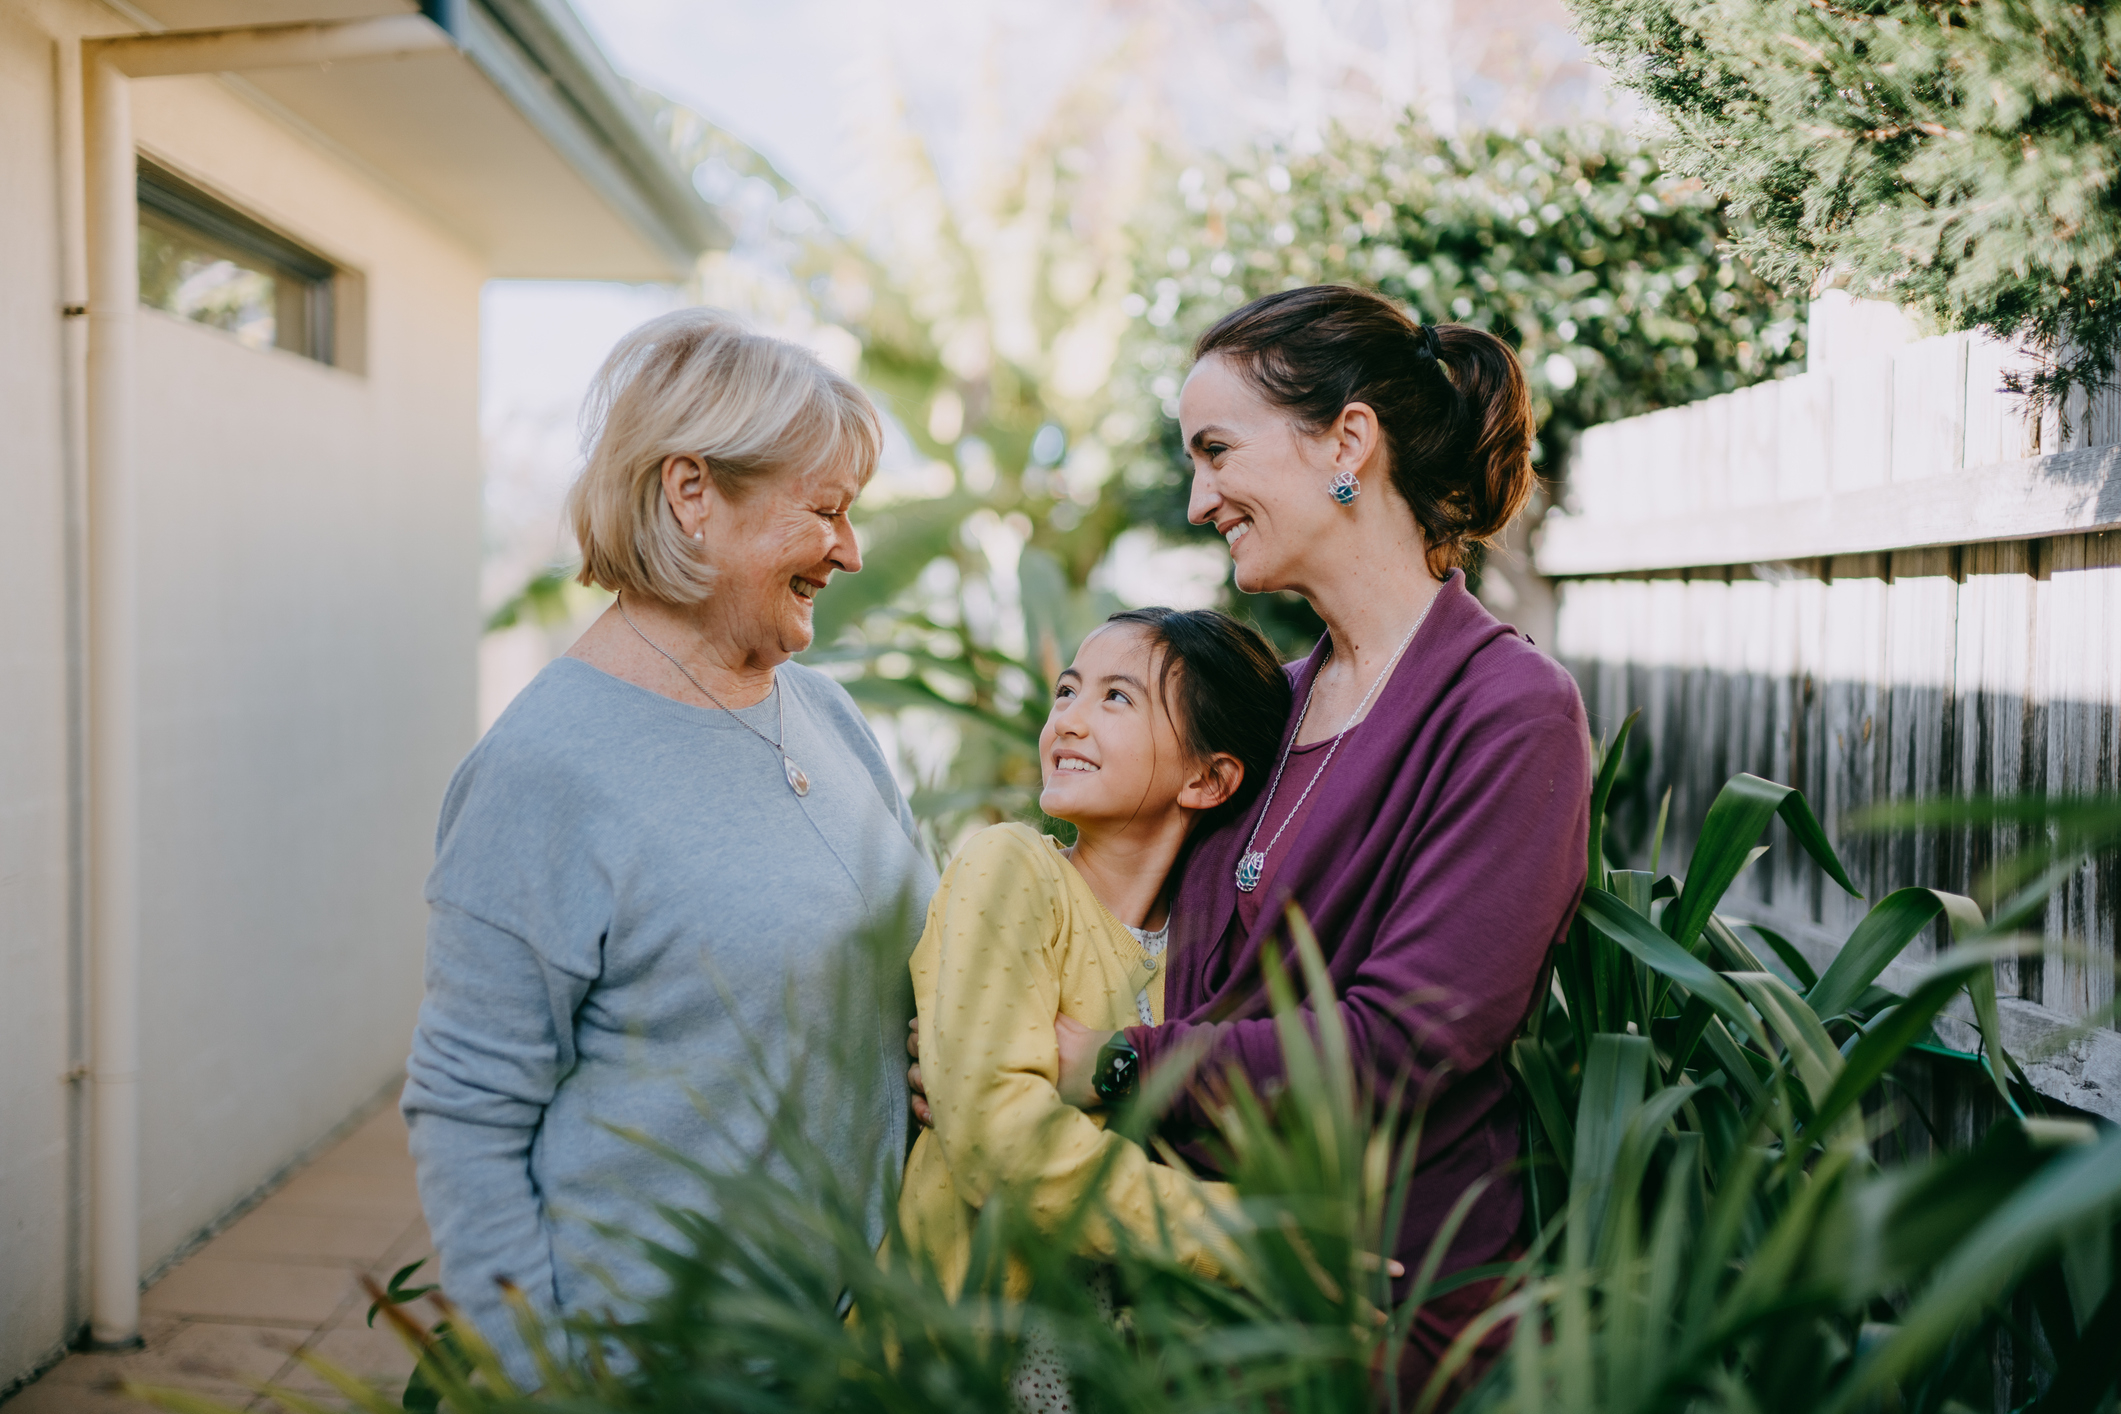 Three generations of females smiling and standing together outside near plants